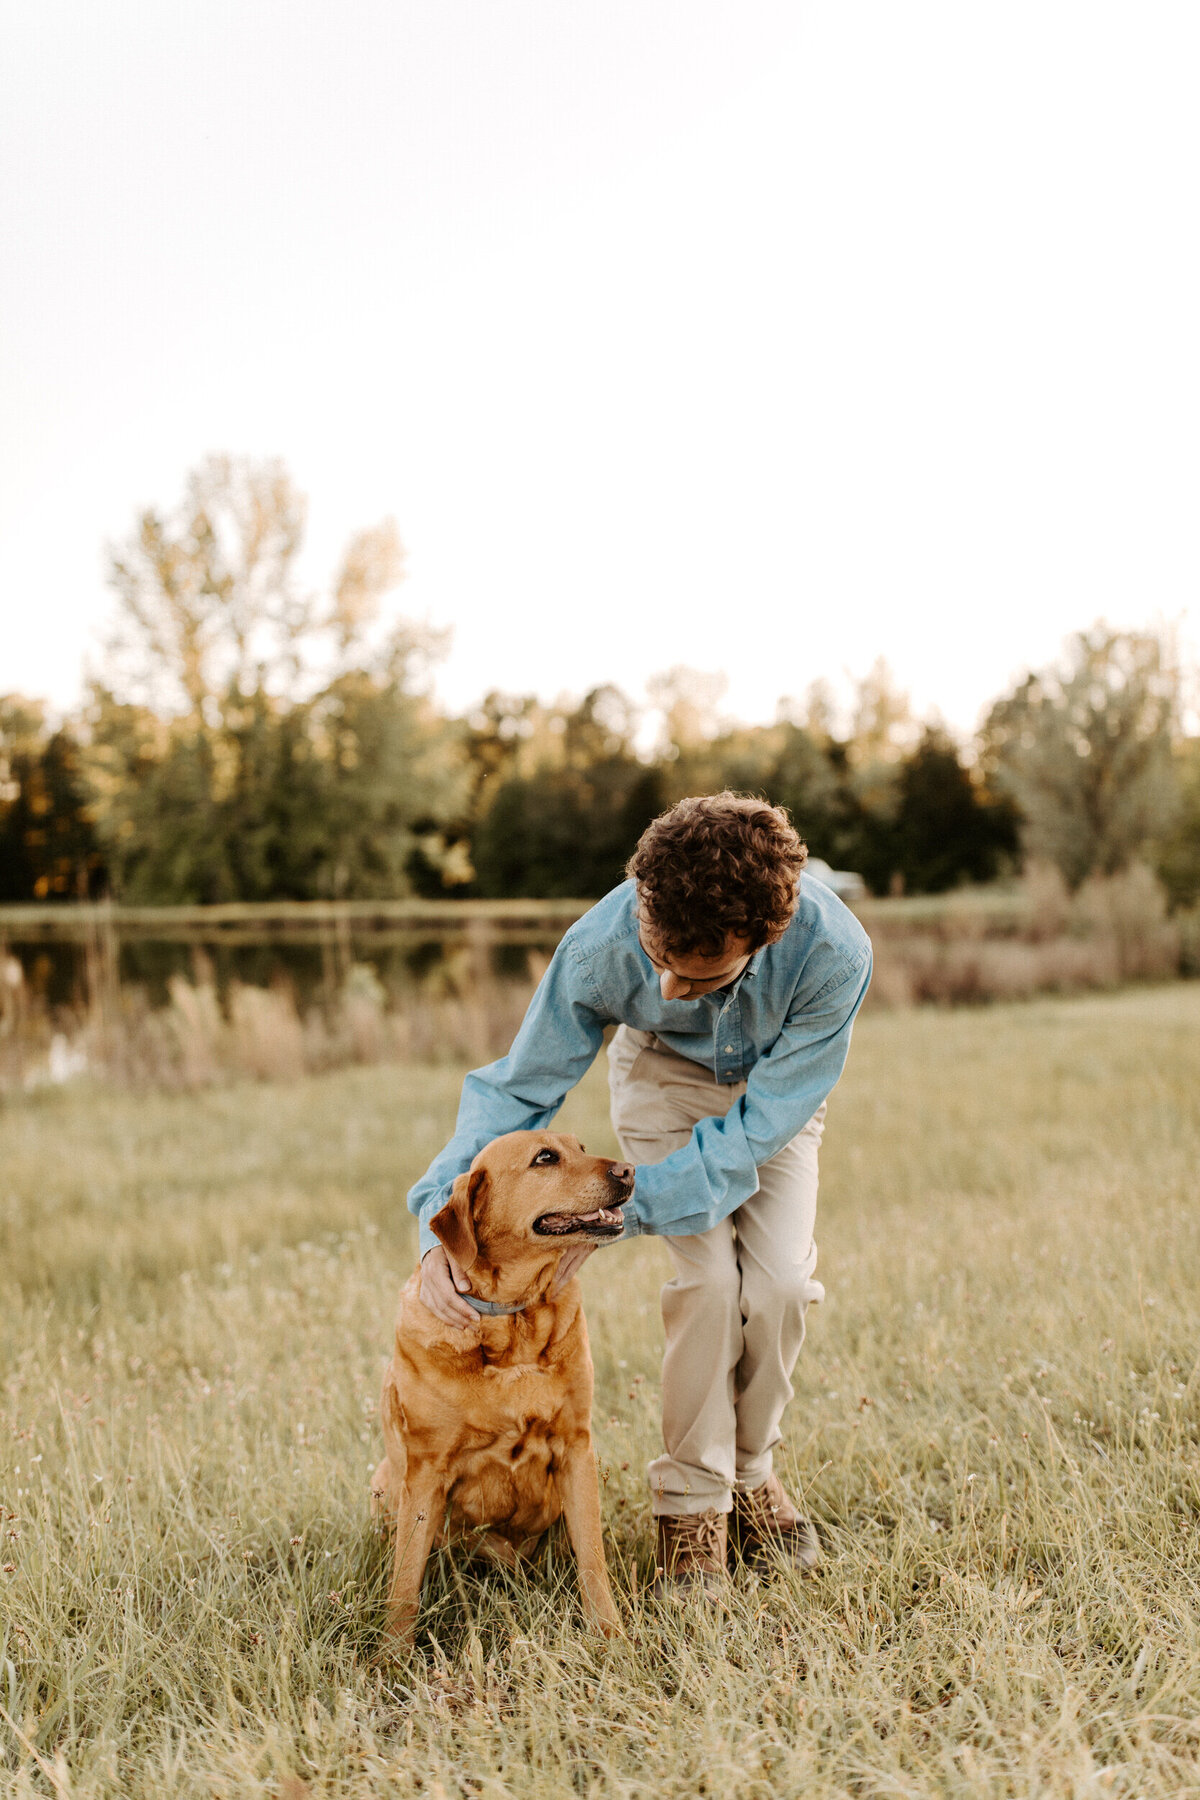 Senior boy in a field with his dog